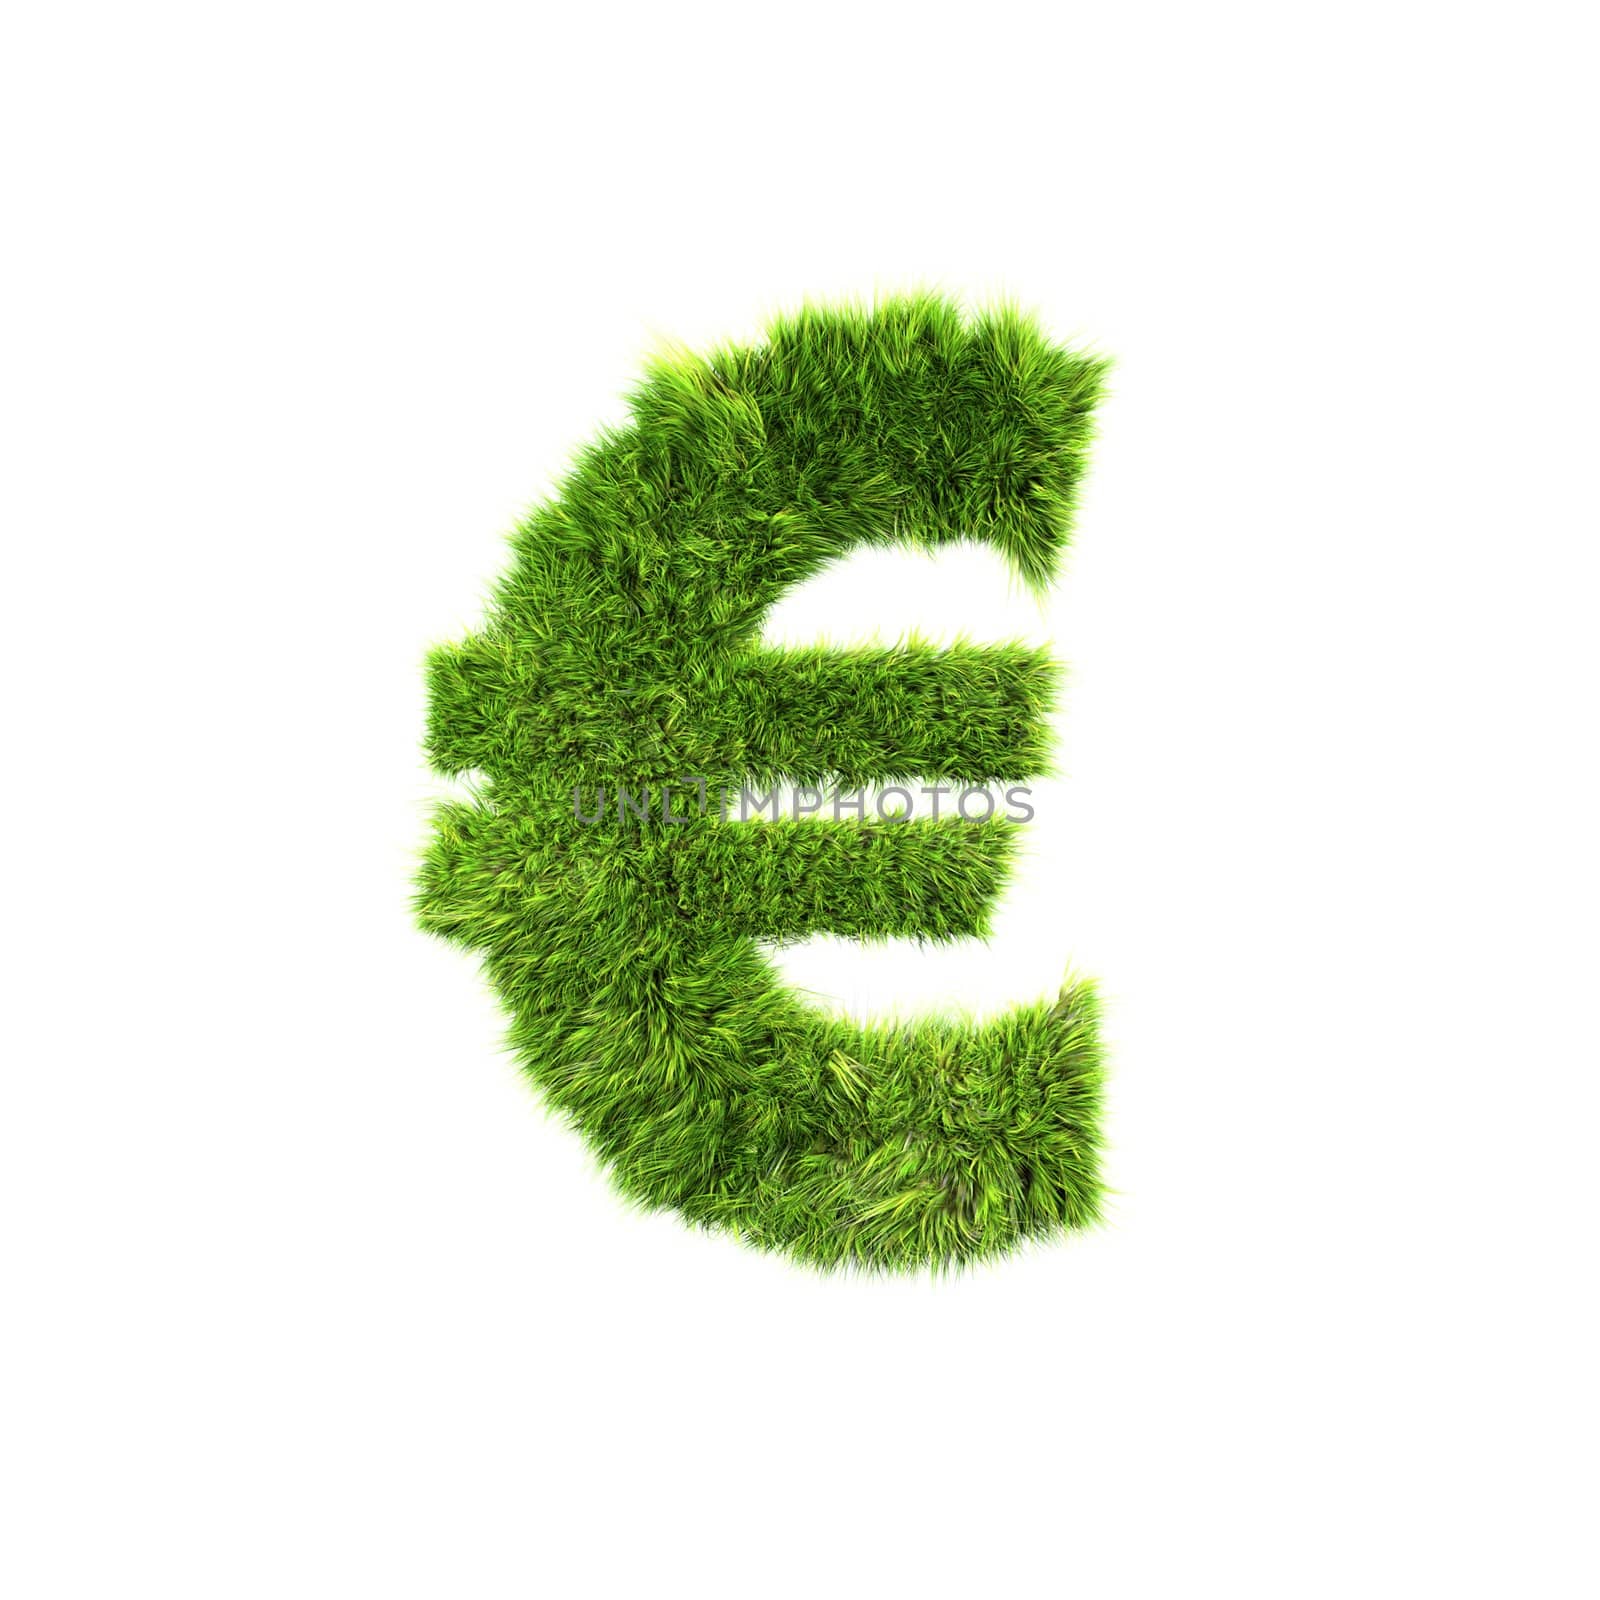 3d grass currency sign isolated on a white background - euro by chrisroll